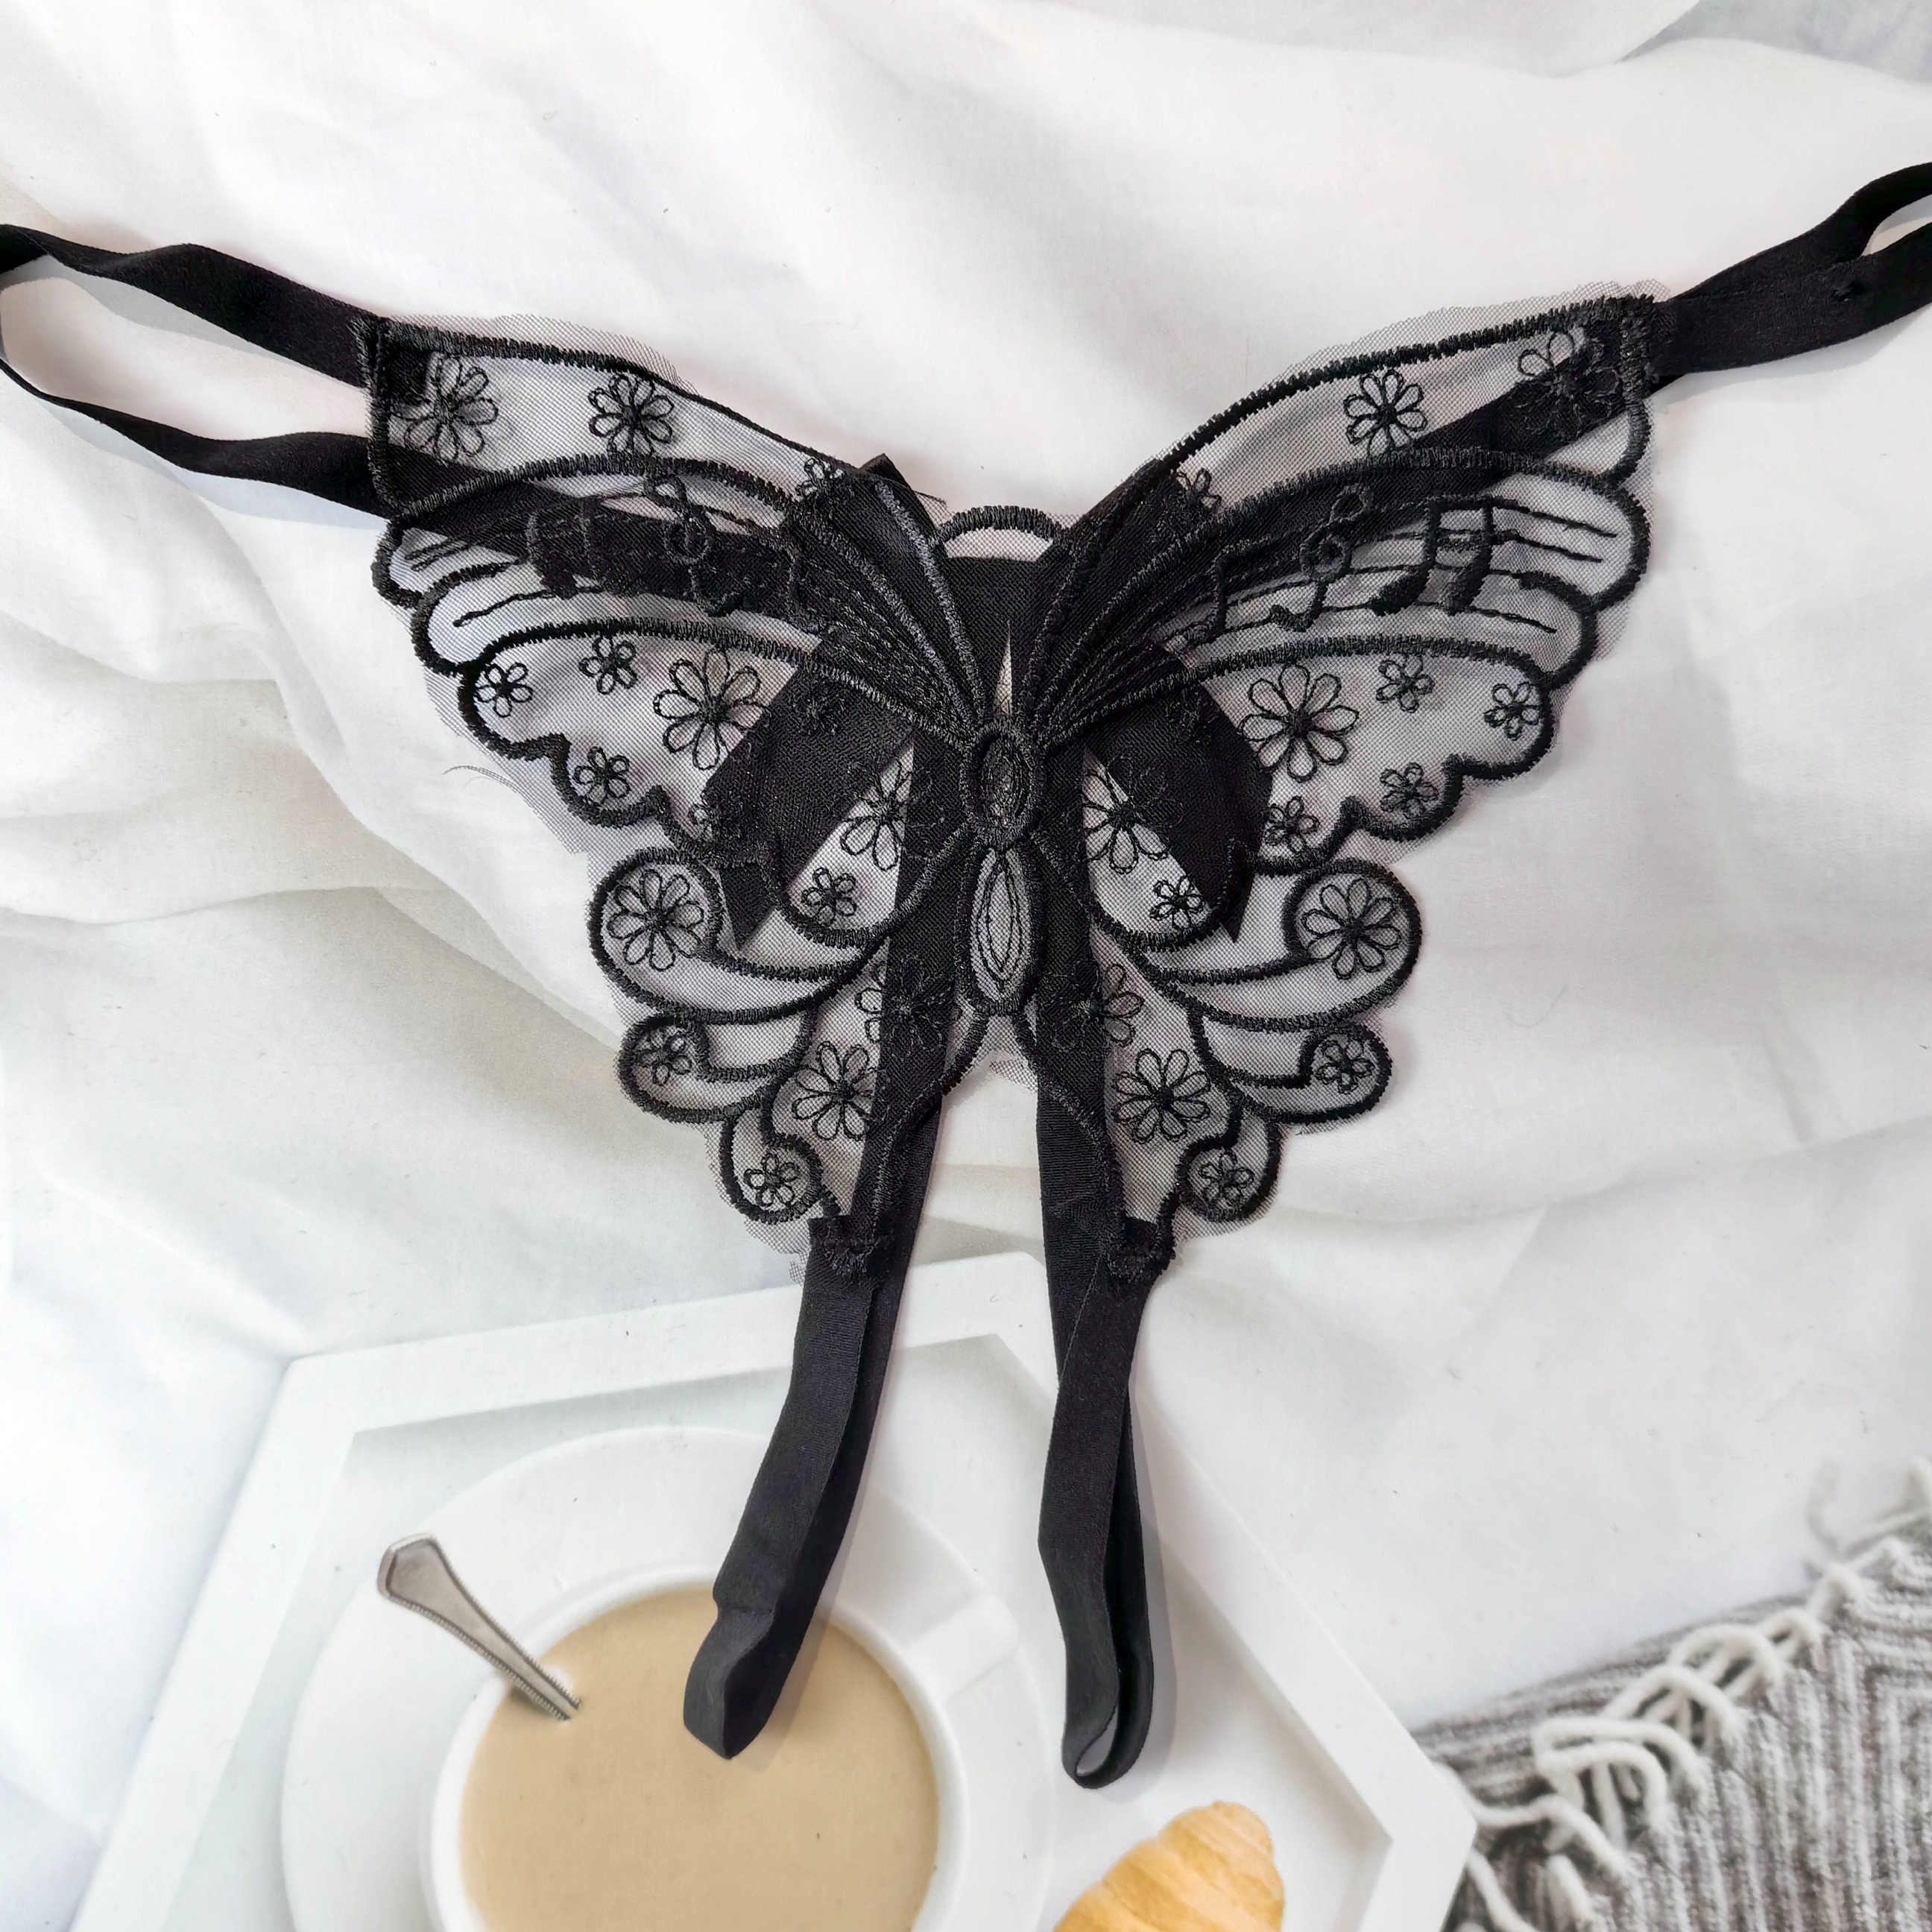 Butterfly Designs Sexy Panty – Owomaniyah